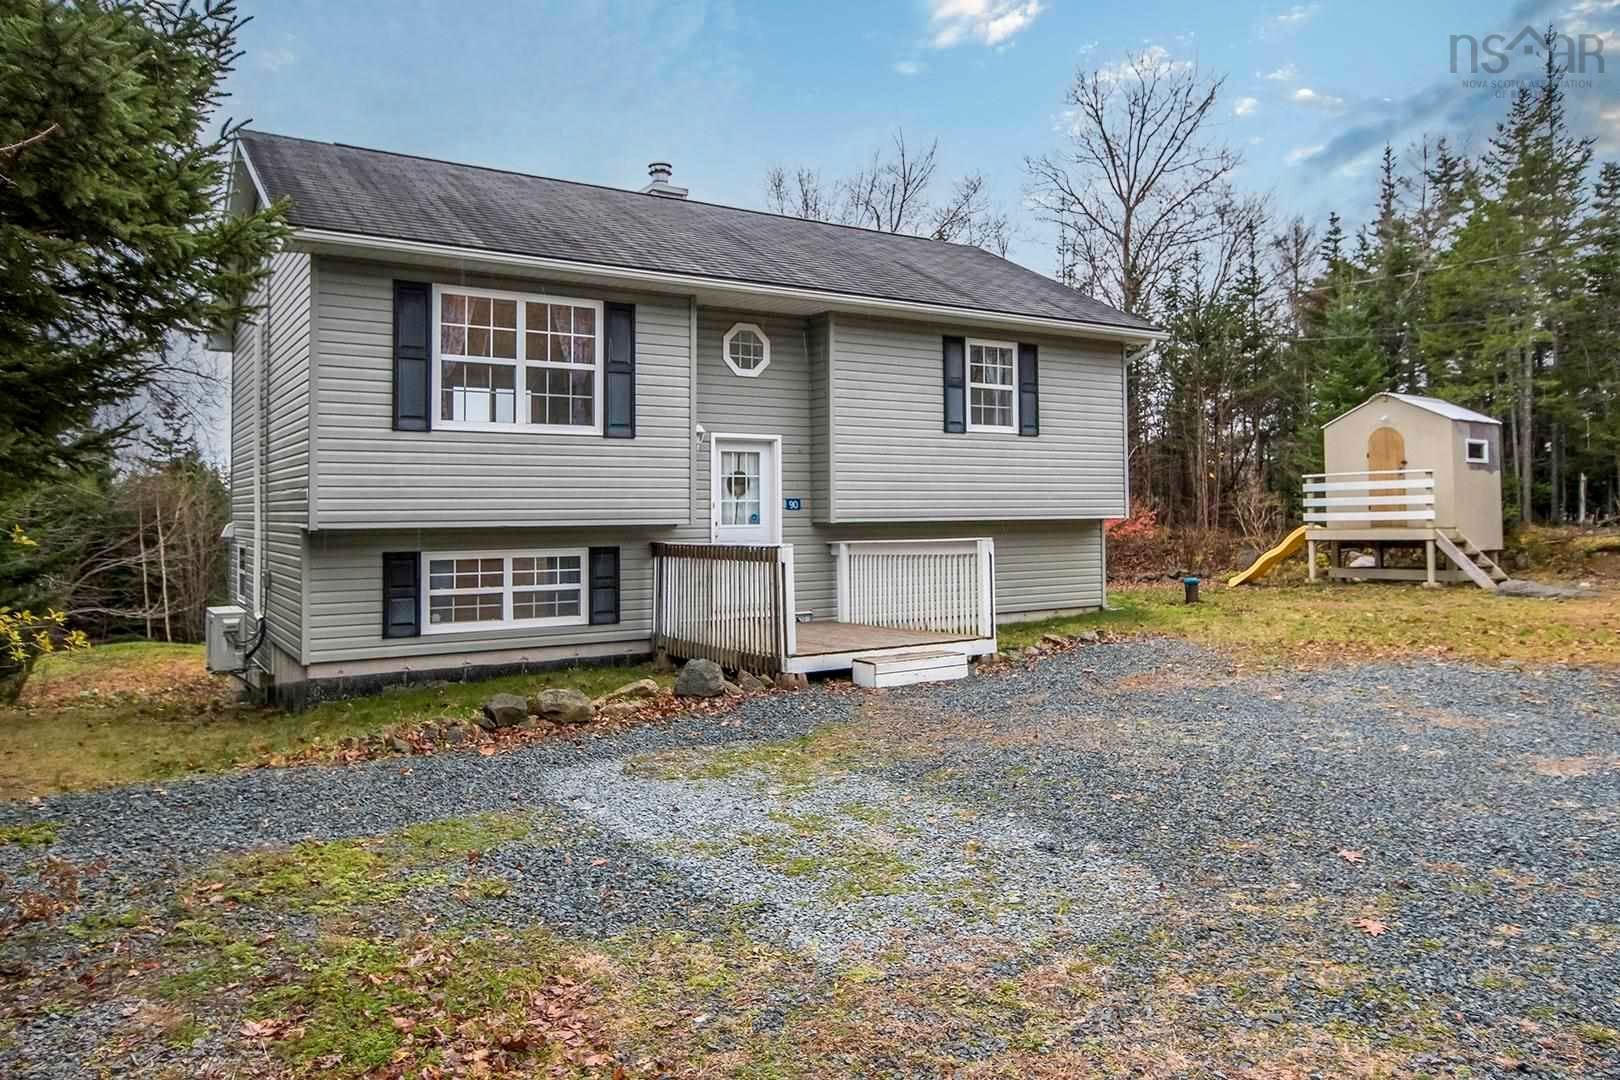 Main Photo: 90 Schooner Drive in Lawrencetown: 31-Lawrencetown, Lake Echo, Porters Lake Residential for sale (Halifax-Dartmouth)  : MLS®# 202128184